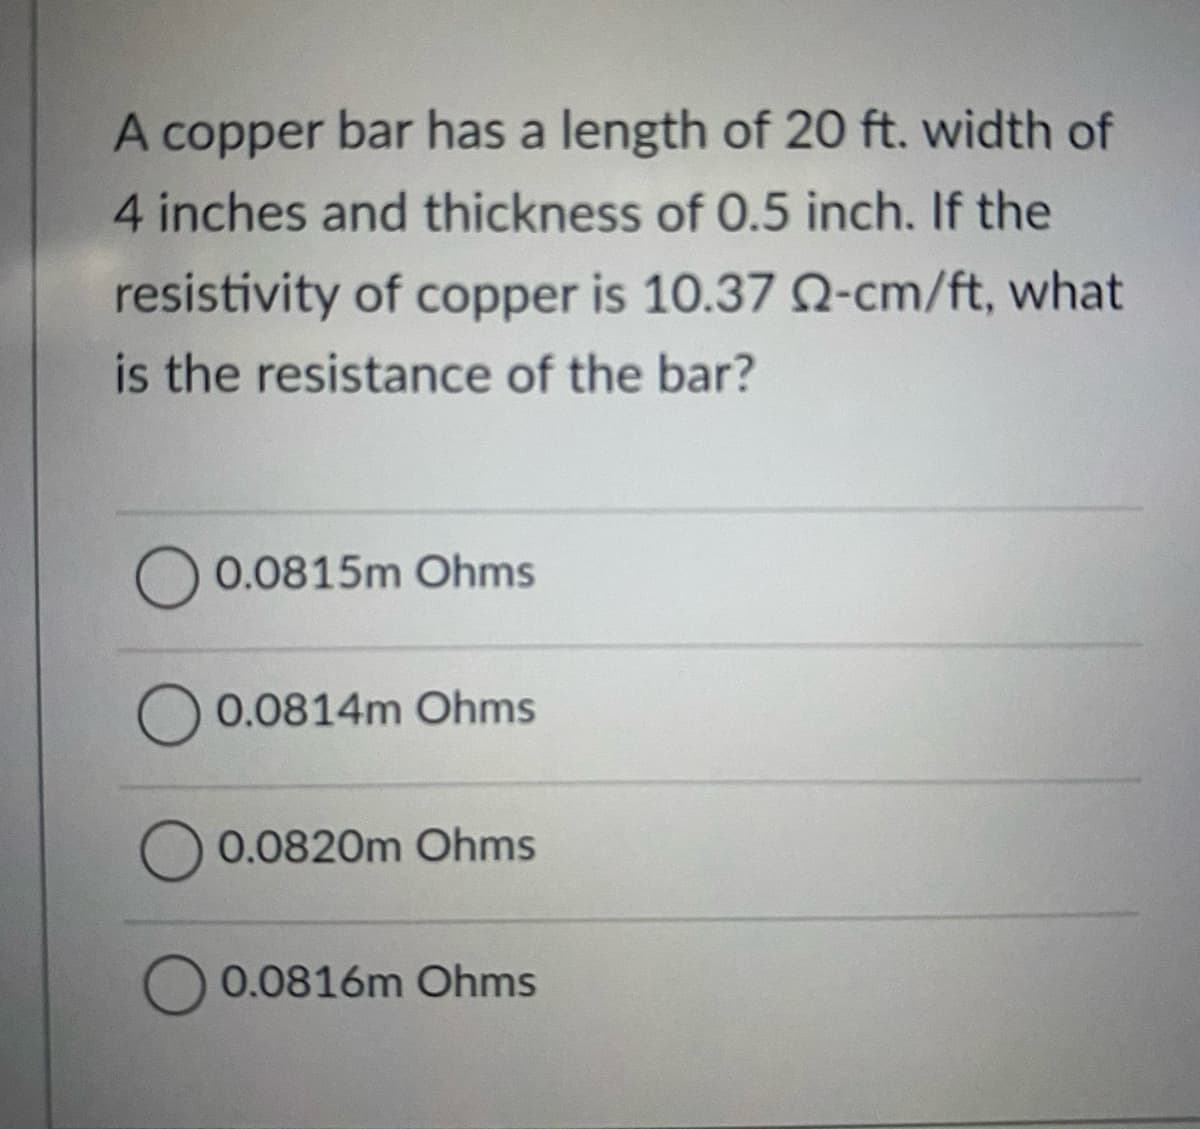 A copper bar has a length of 20 ft. width of
4 inches and thickness of 0.5 inch. If the
resistivity of copper is 10.37 N-cm/ft, what
is the resistance of the bar?
0.0815m Ohms
0.0814m Ohms
0.0820m Ohms
0.0816m Ohms
